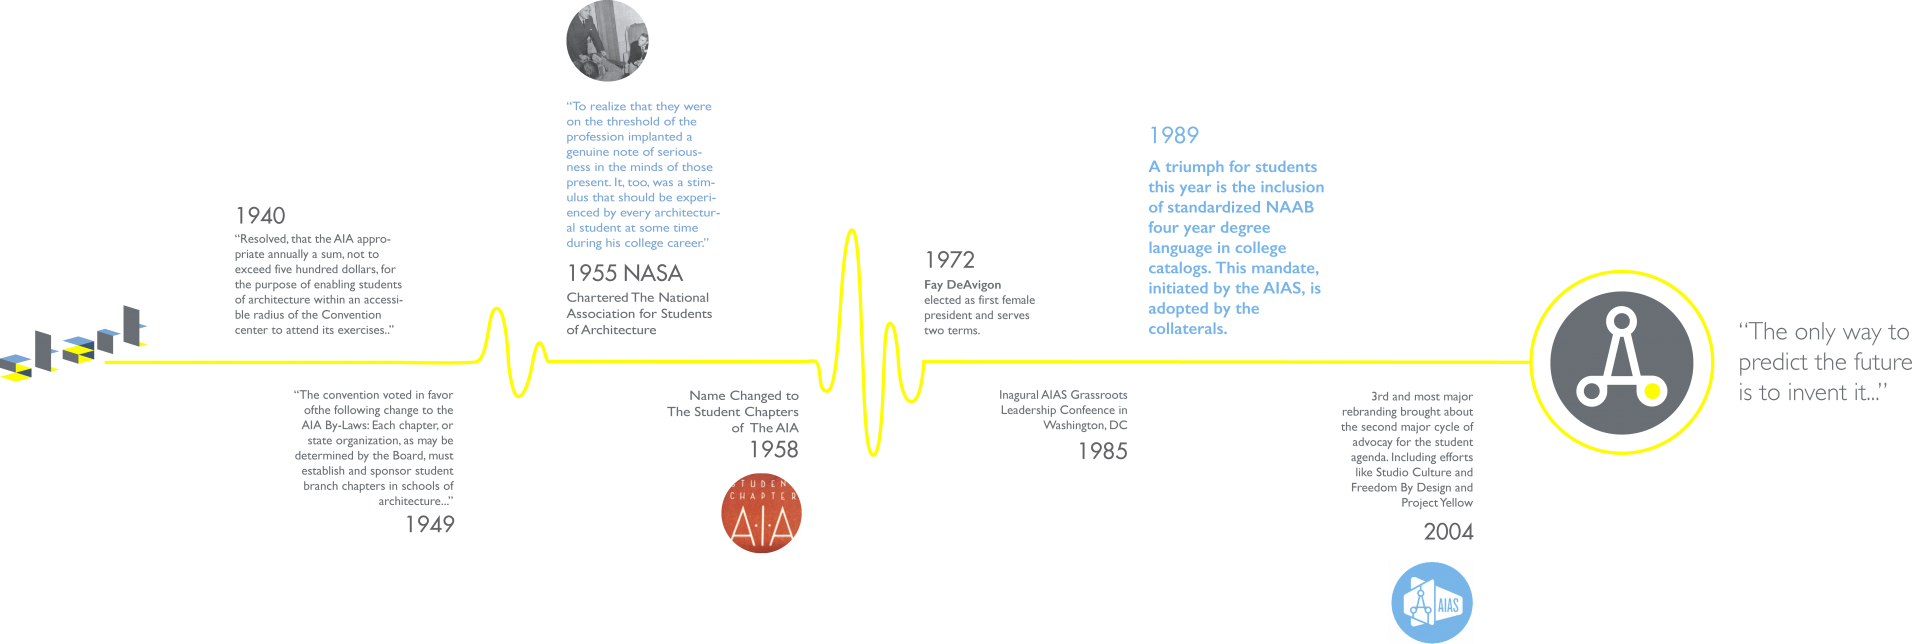 AIAS Timeline